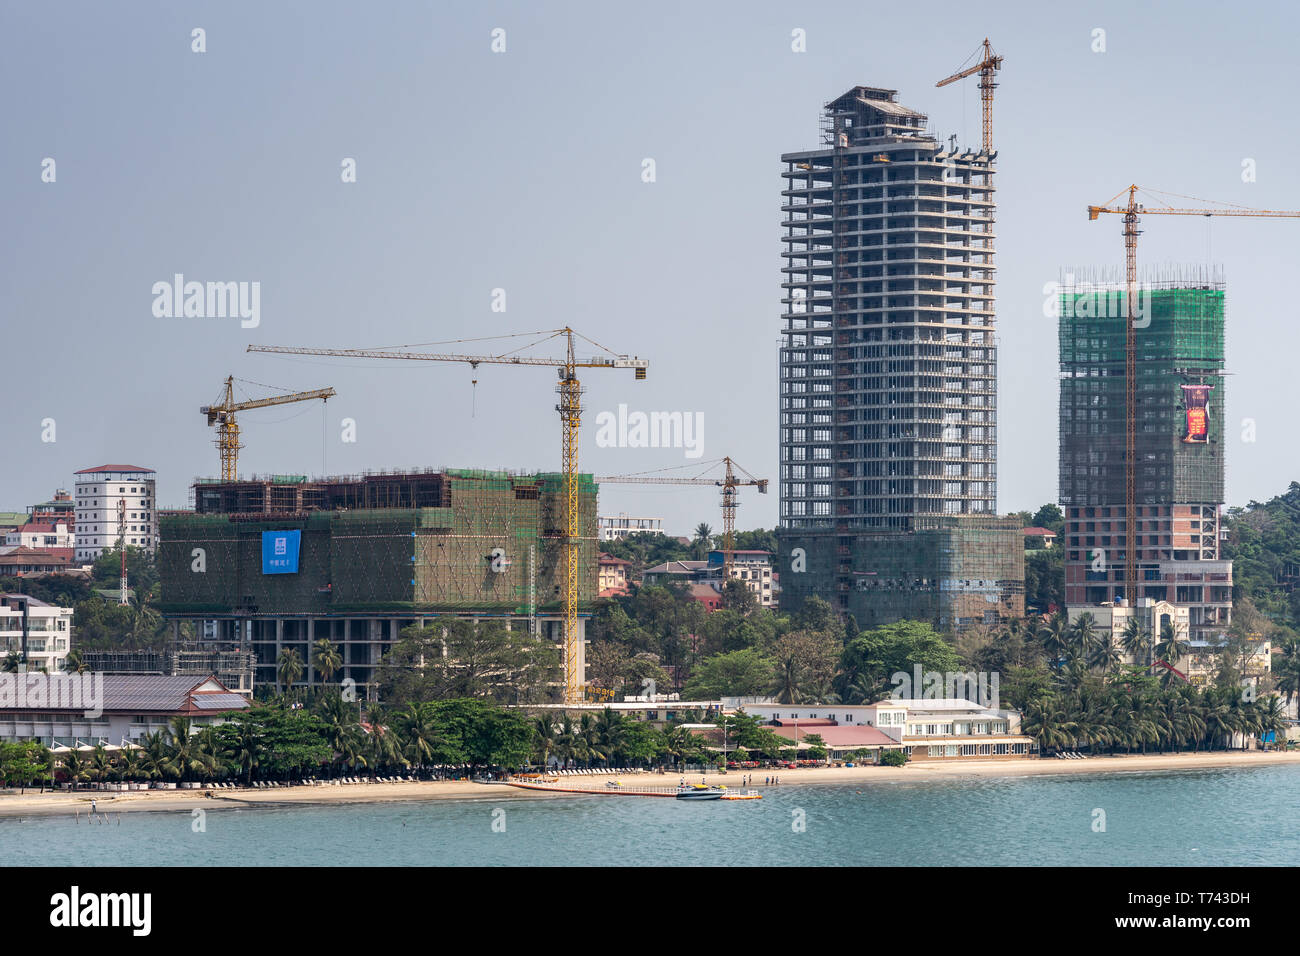 Sihanoukville, Cambodia - March 15, 2019: Shoreline turned into massive construction site of tall high rise buildings under light blue sky, yellow cra Stock Photo